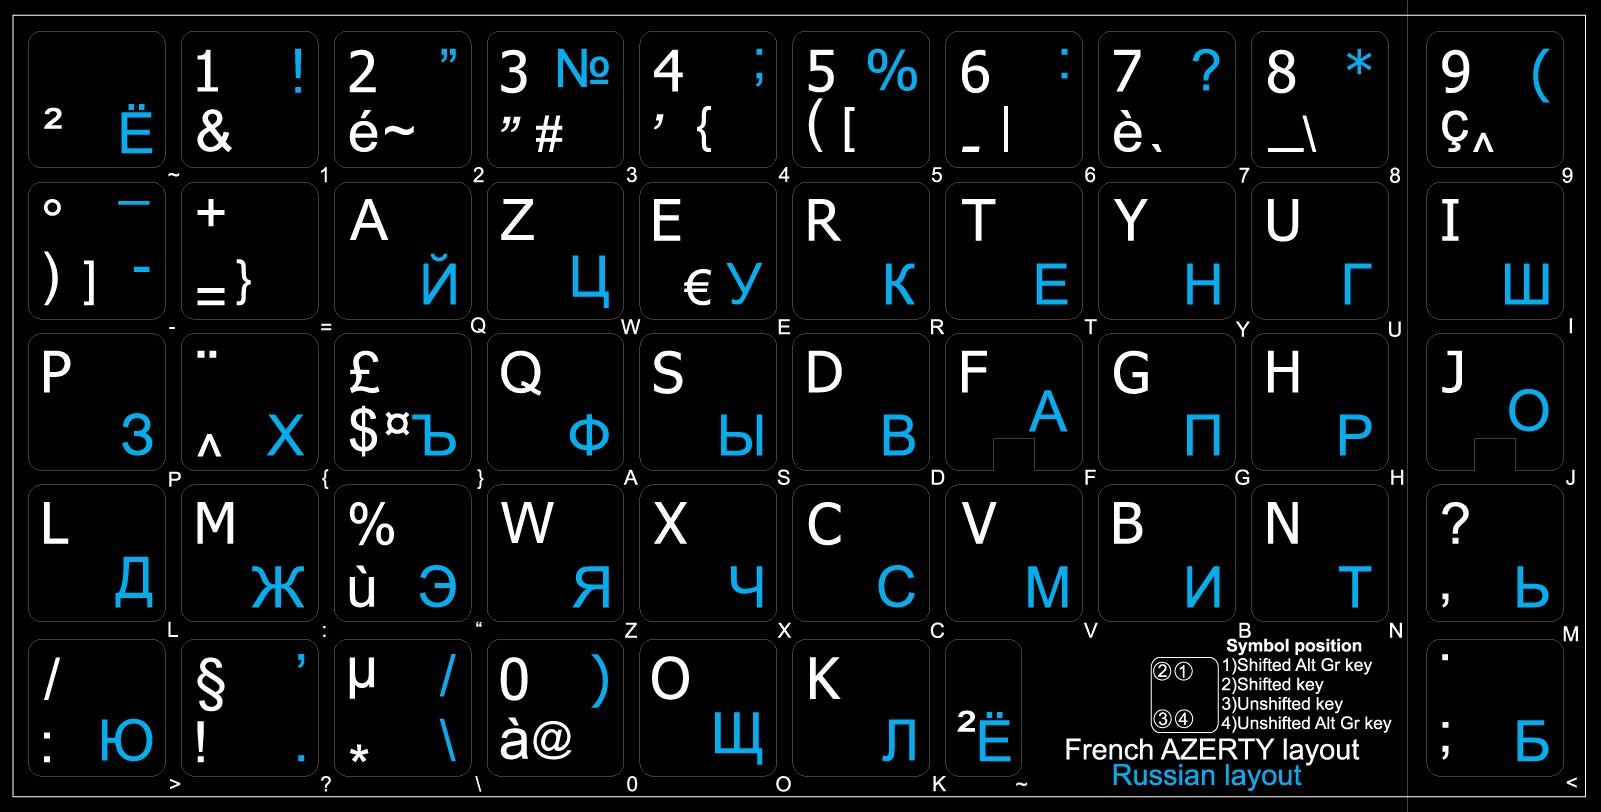 French AZERTY Trans. Keyboard Stickers Red Letters 